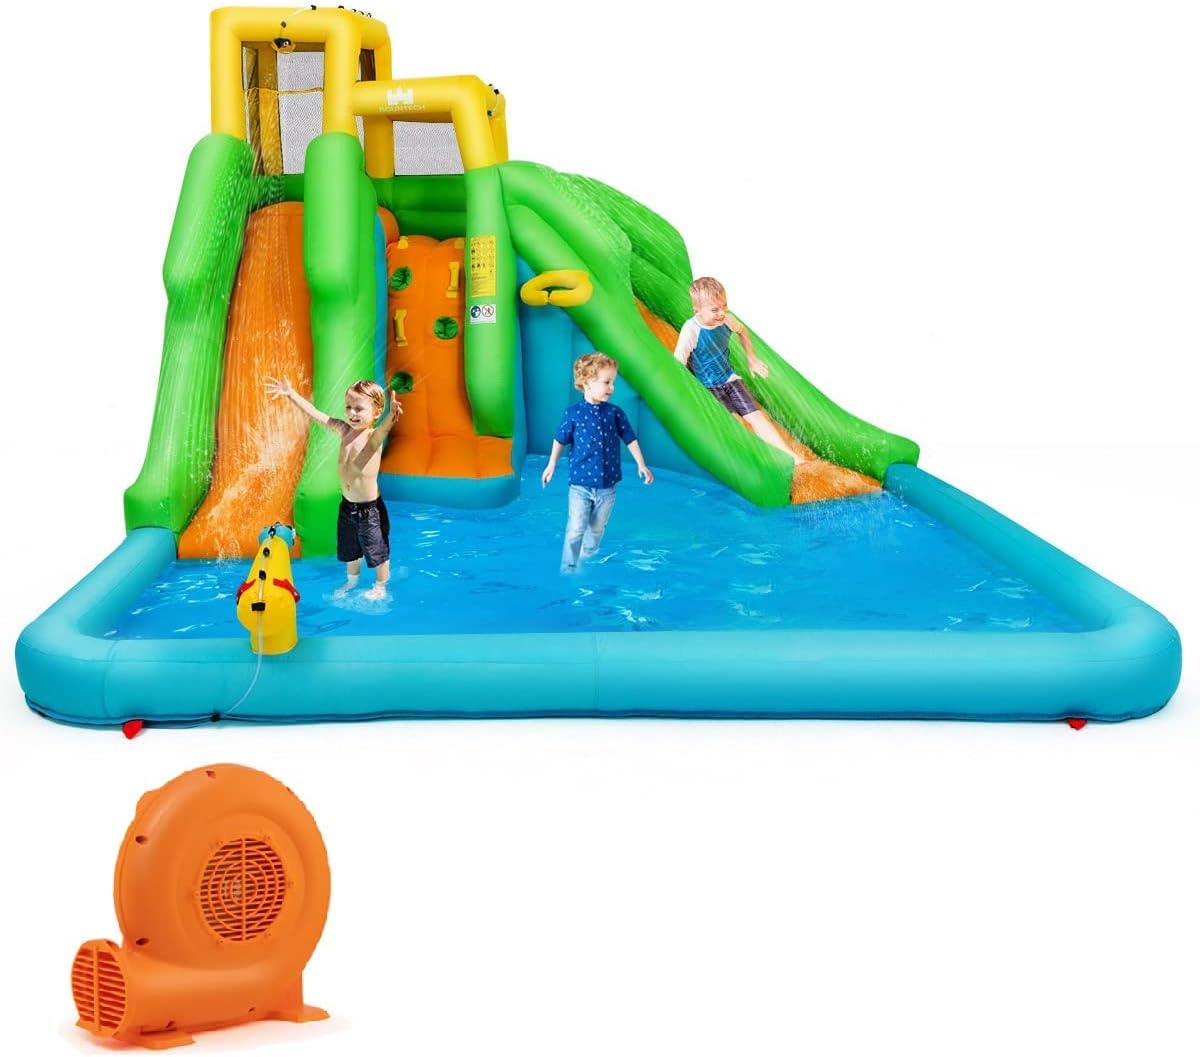 BOUNTECH Inflatable Water Slide, 6 in 1 Giant Waterslide Park for Kids Outdoor Fun with GFCI 550W Blower, 2 Slides, Splash Pool, Blow up Water Slides Inflatables for Kids and Adults Backyard Gifts